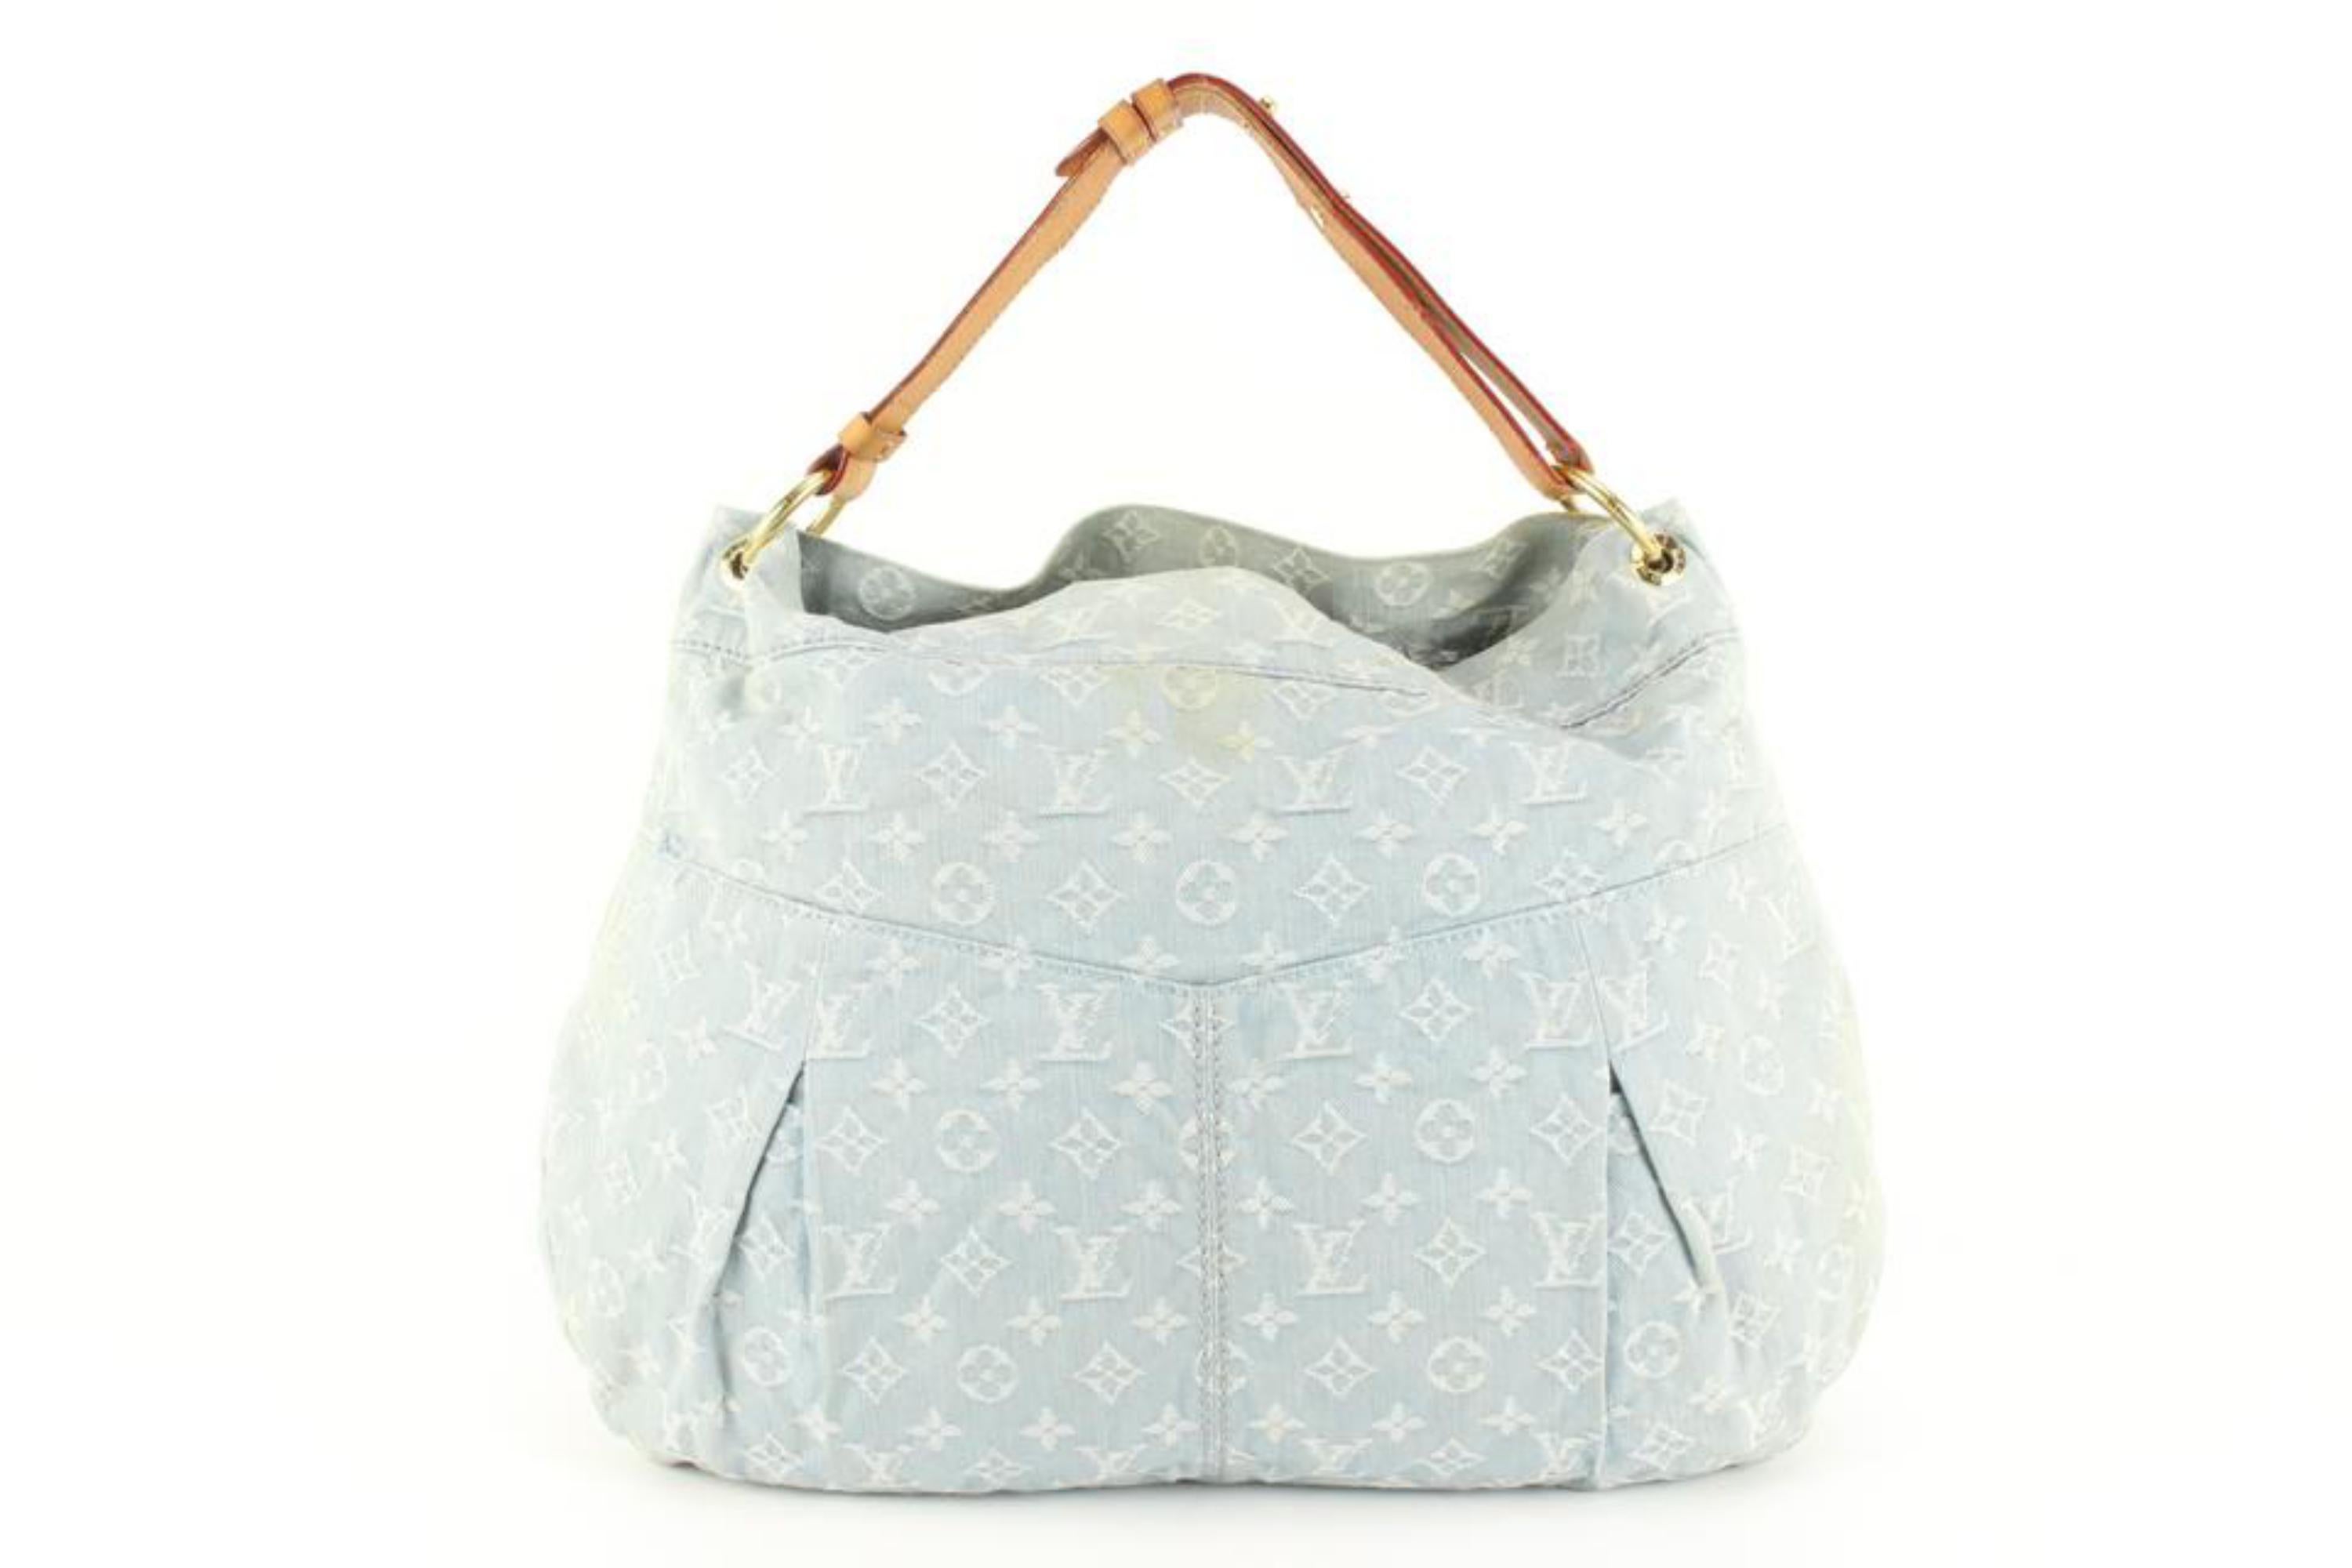 Louis Vuitton Light Blue Monogram Denim  Daily GM Hobo Bag 27lk53s In Fair Condition For Sale In Dix hills, NY